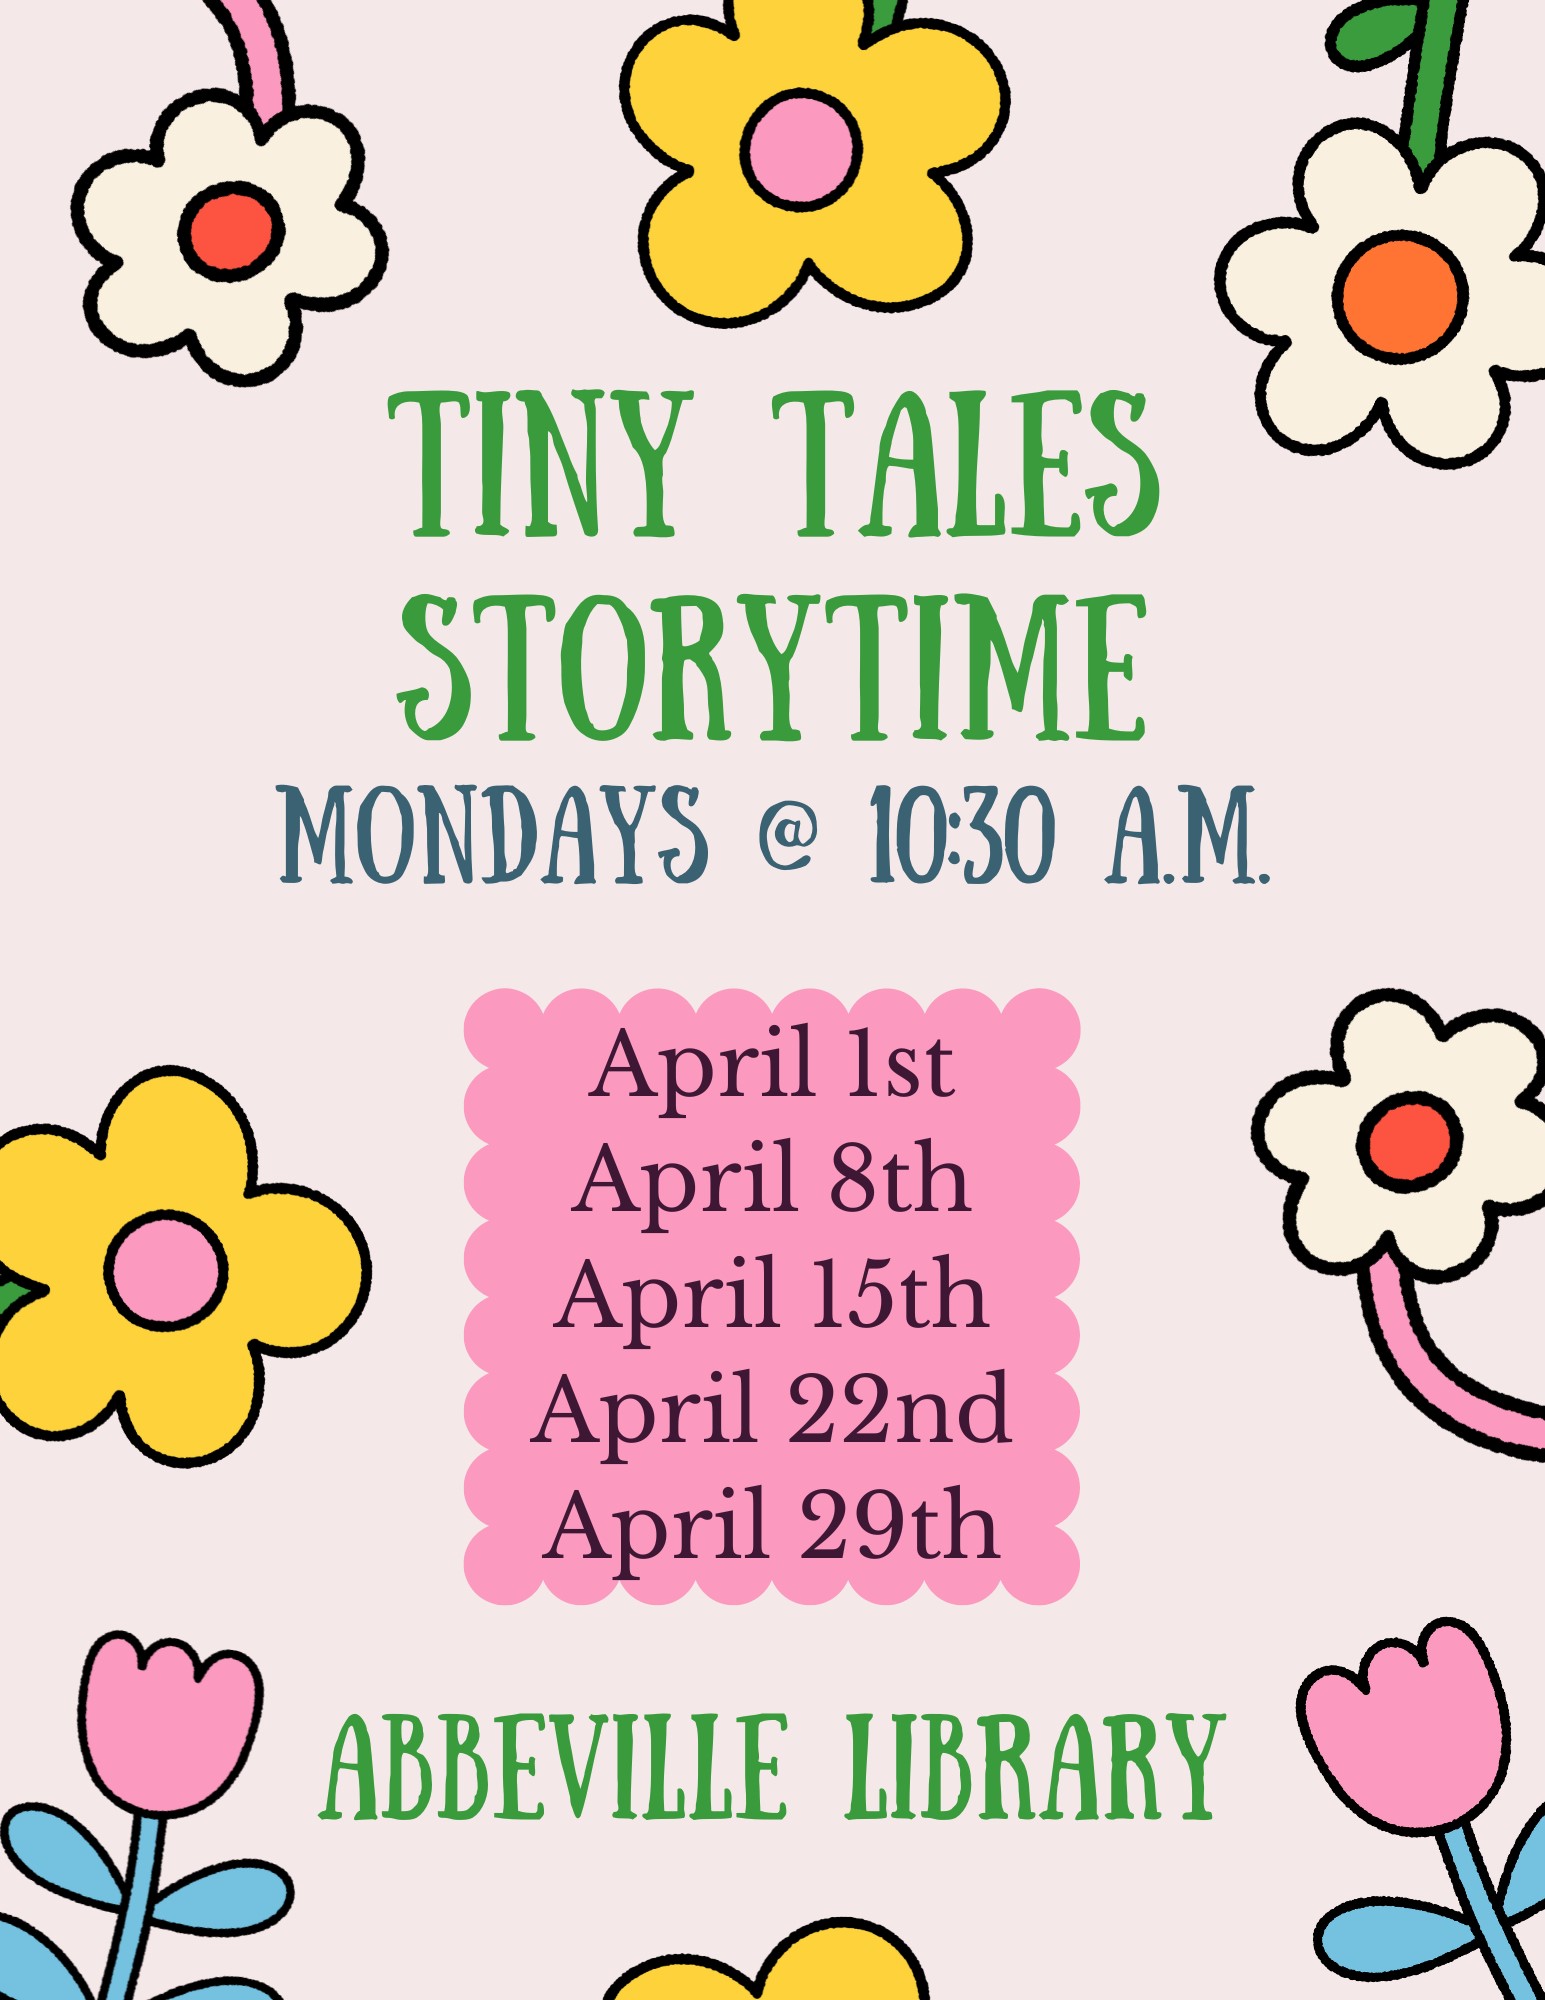 Tiny Tales Storytime-Abbeville